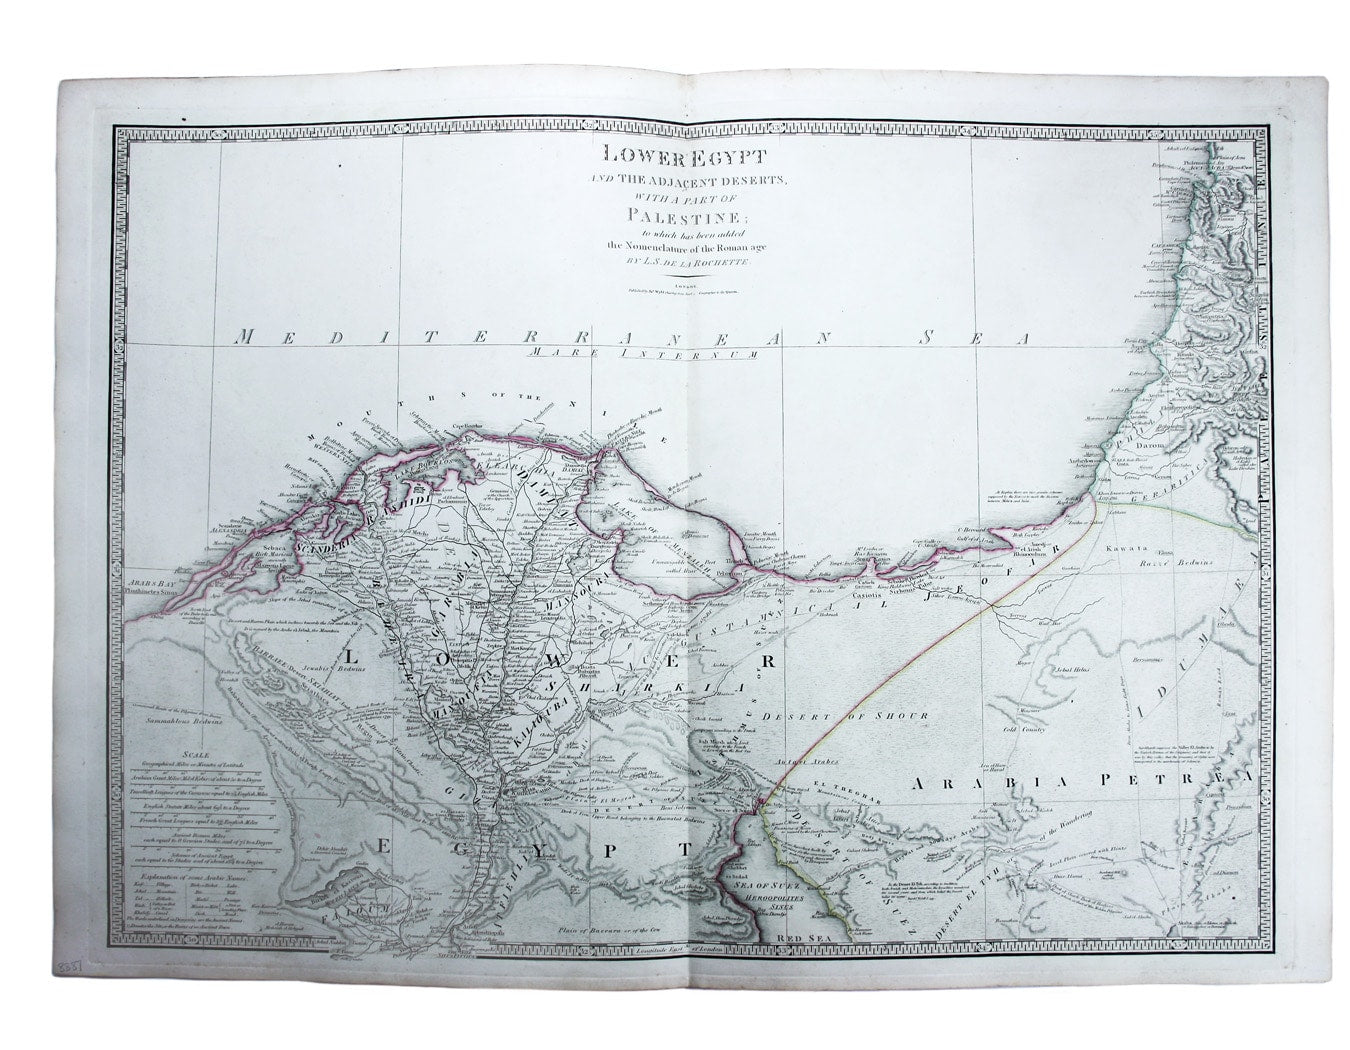 Wyld’s Map of Egypt & Part of the Near East